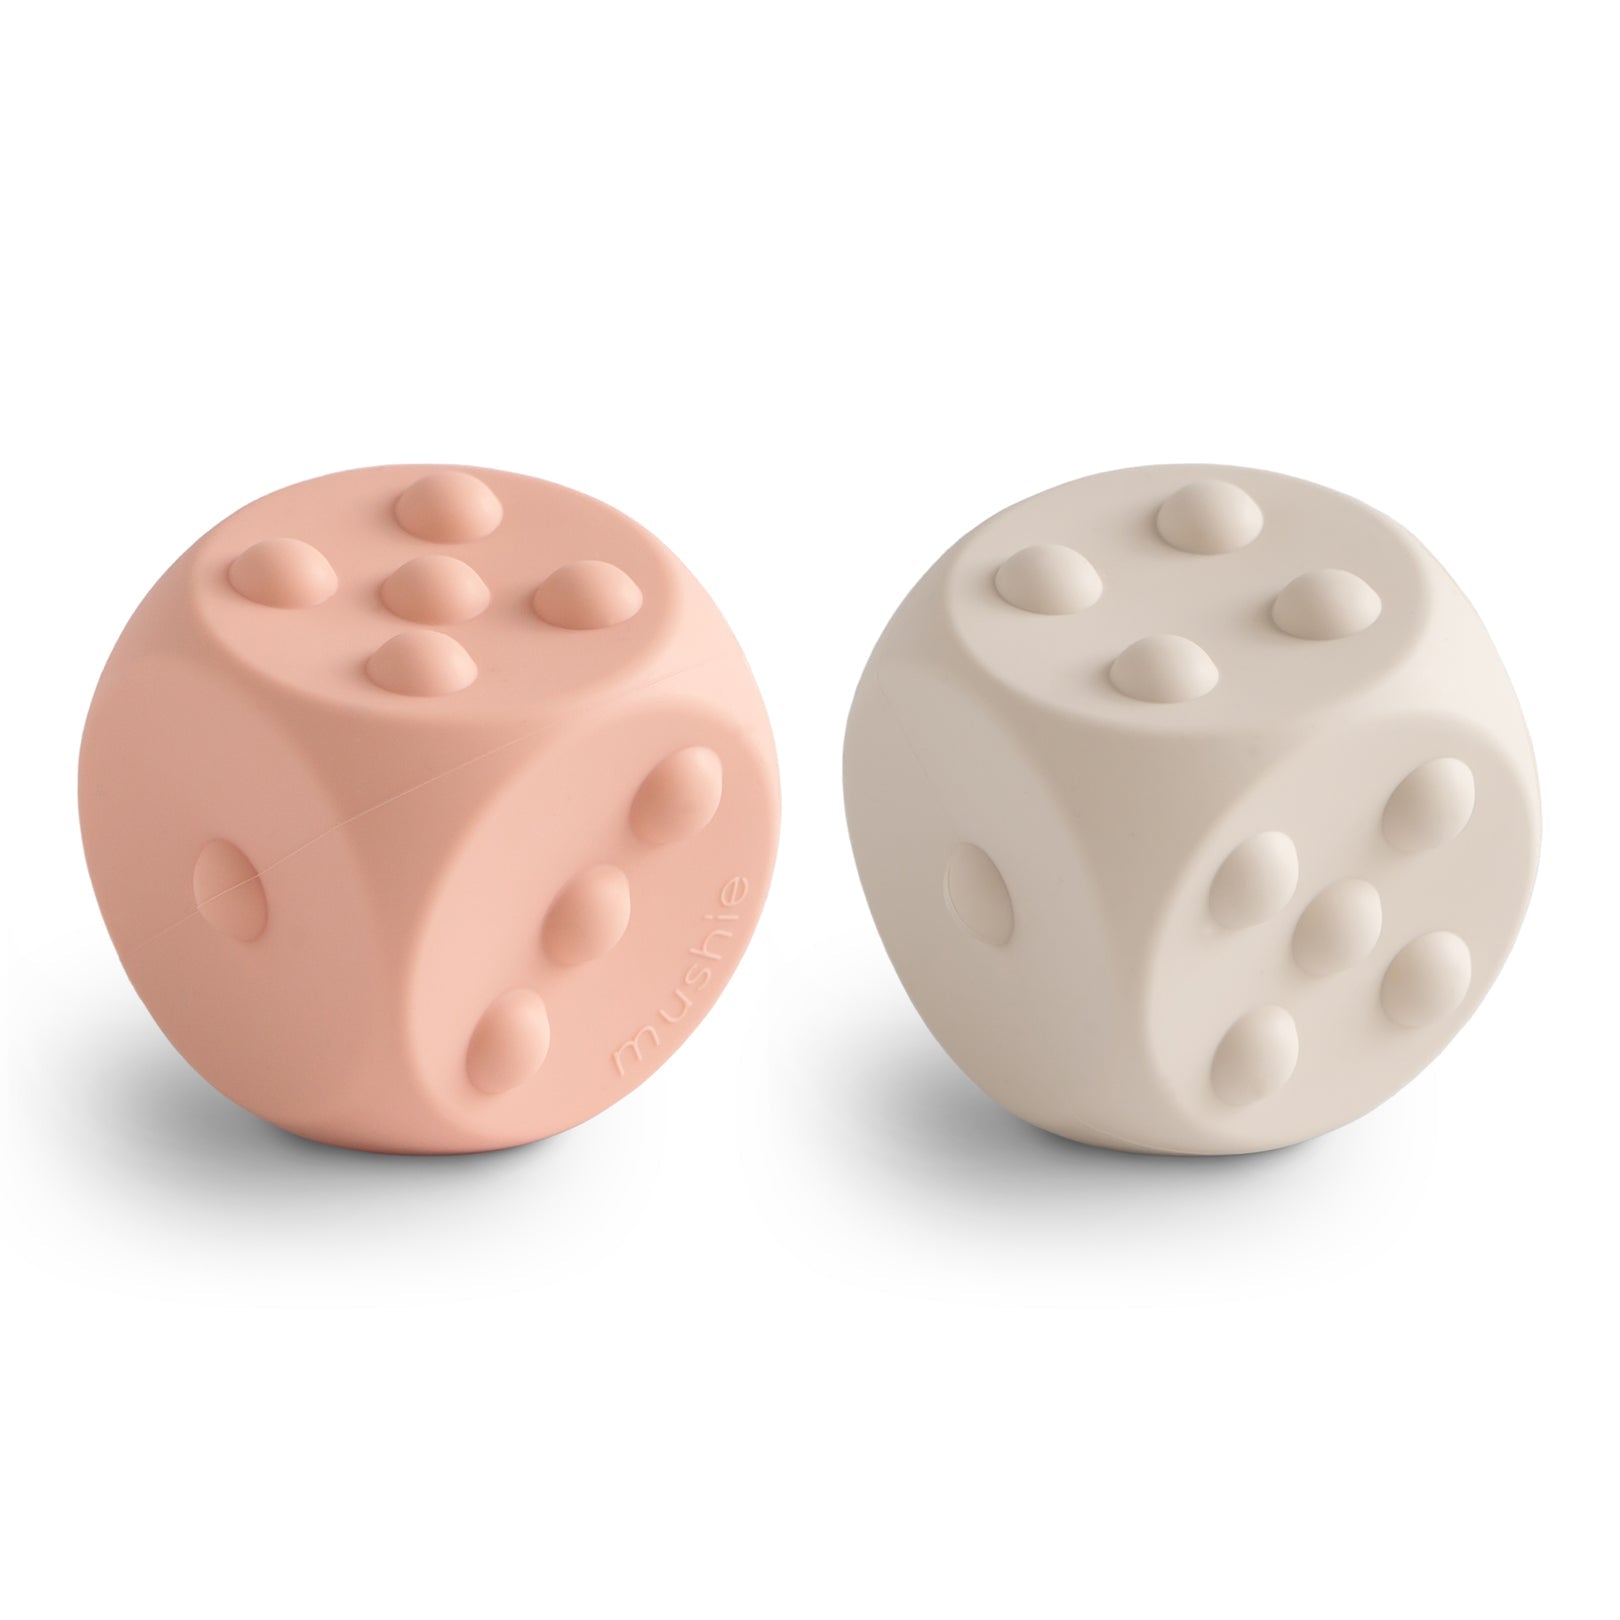 mushie Dice Press Toy 2-Pack (Blush/Shifting Sands)